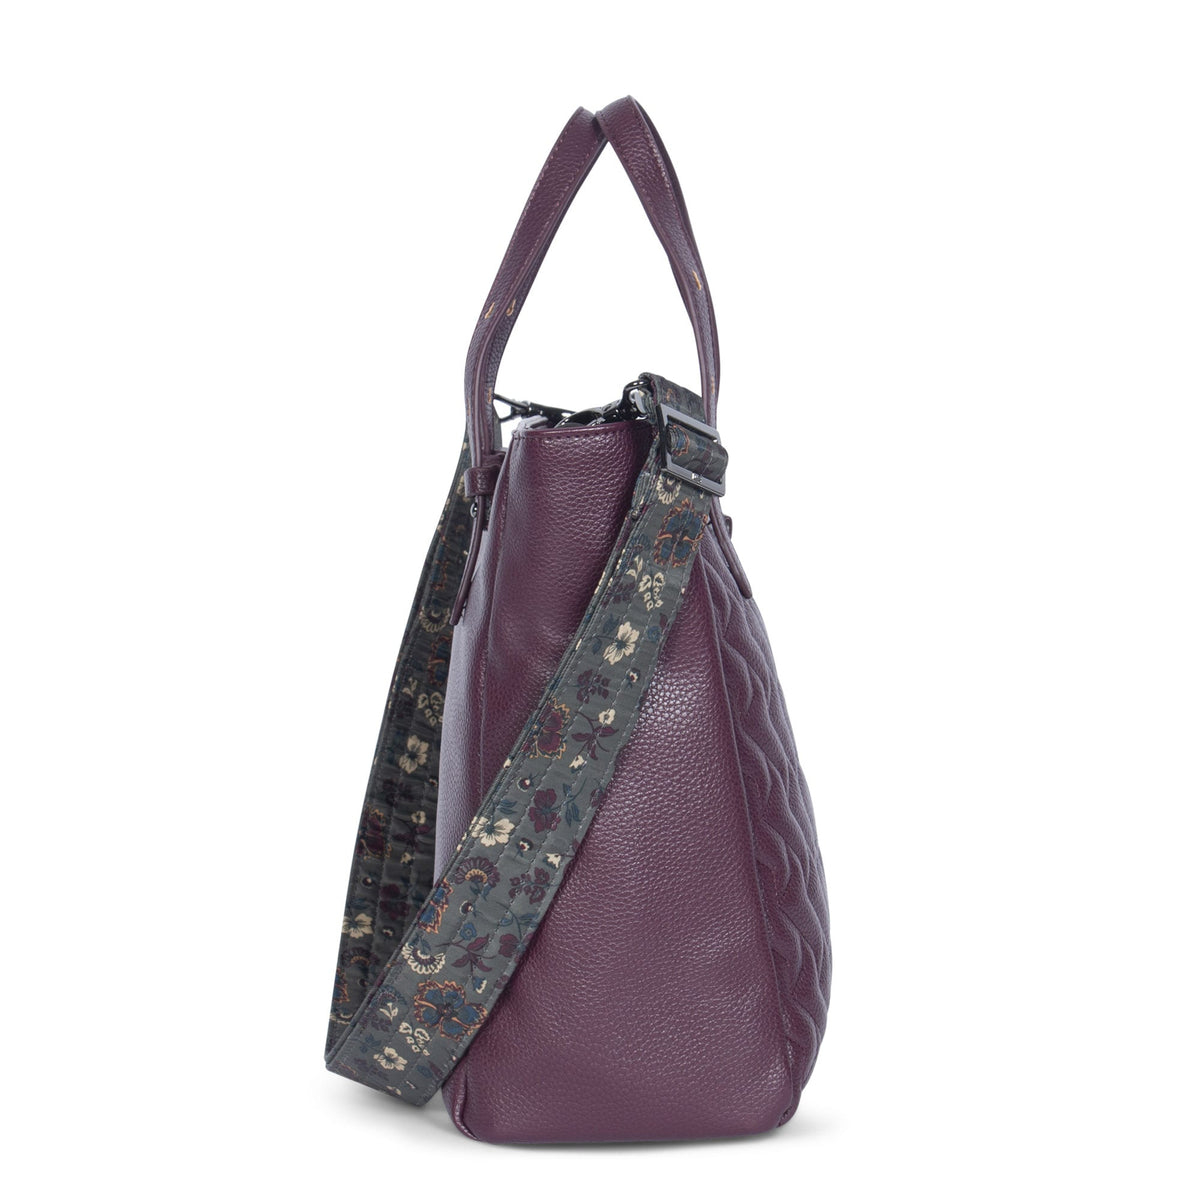 Canter Classic VL Convertible Tote Bag 